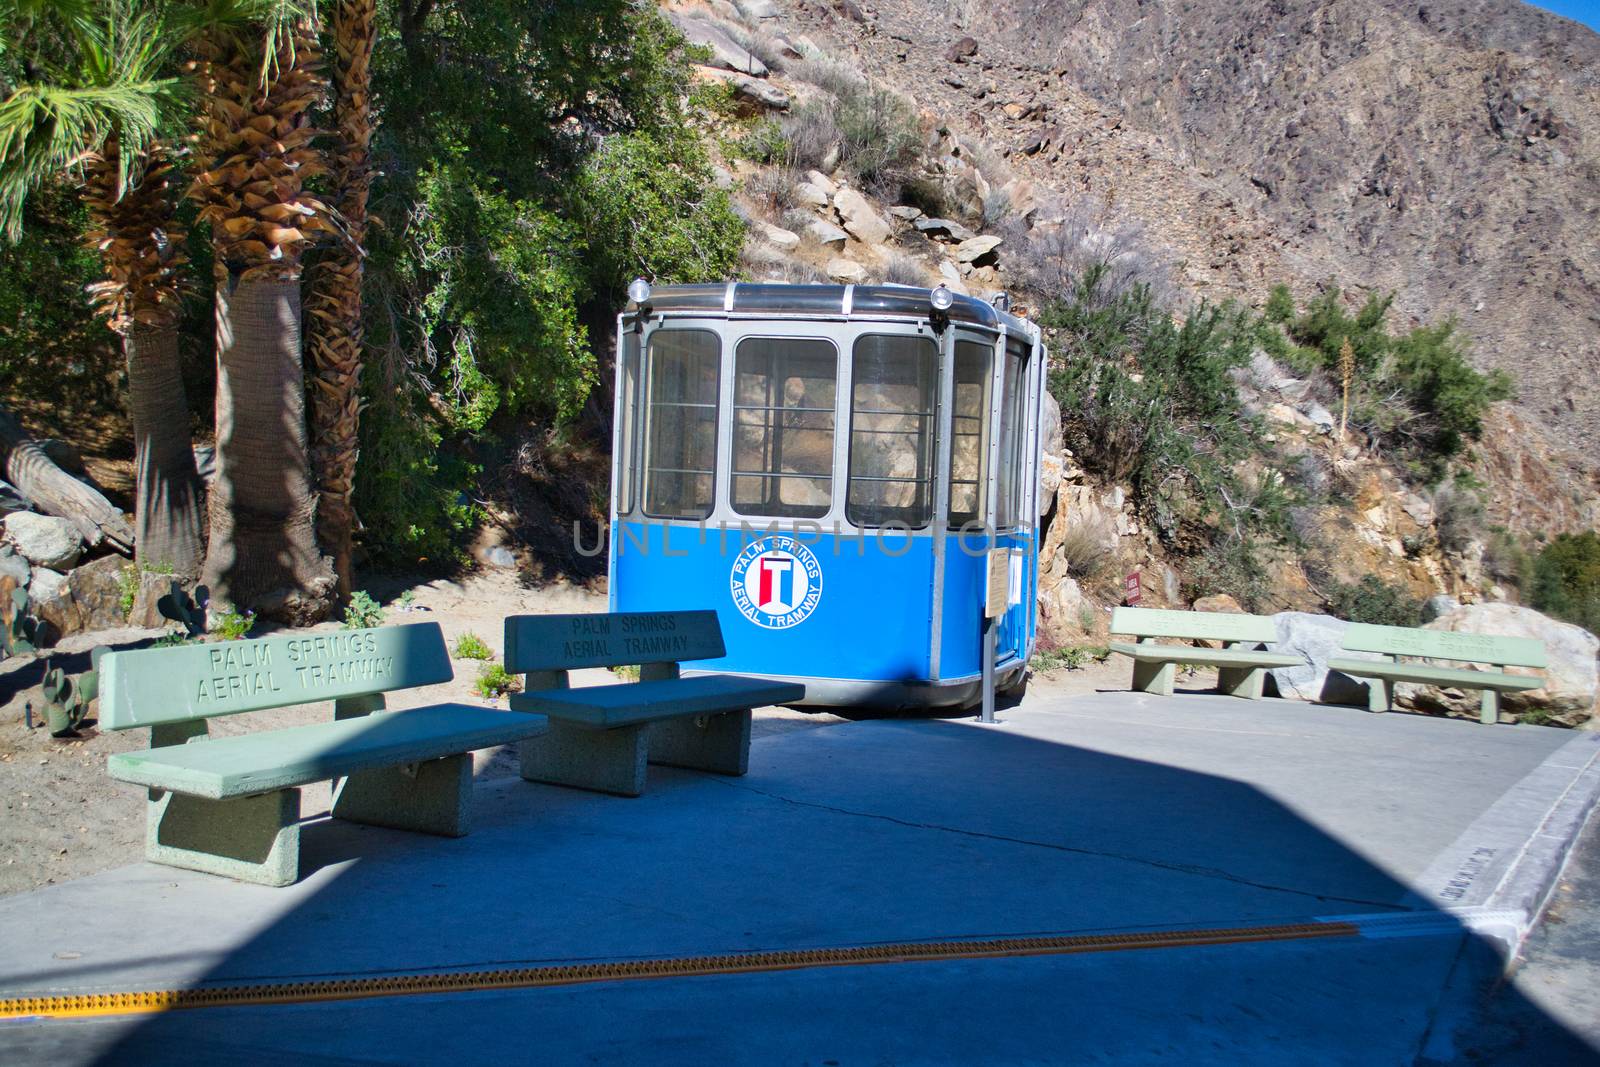 Palm Springs, USA, November 2013: Blue carriage of Aerial Tramway of Palm Springs